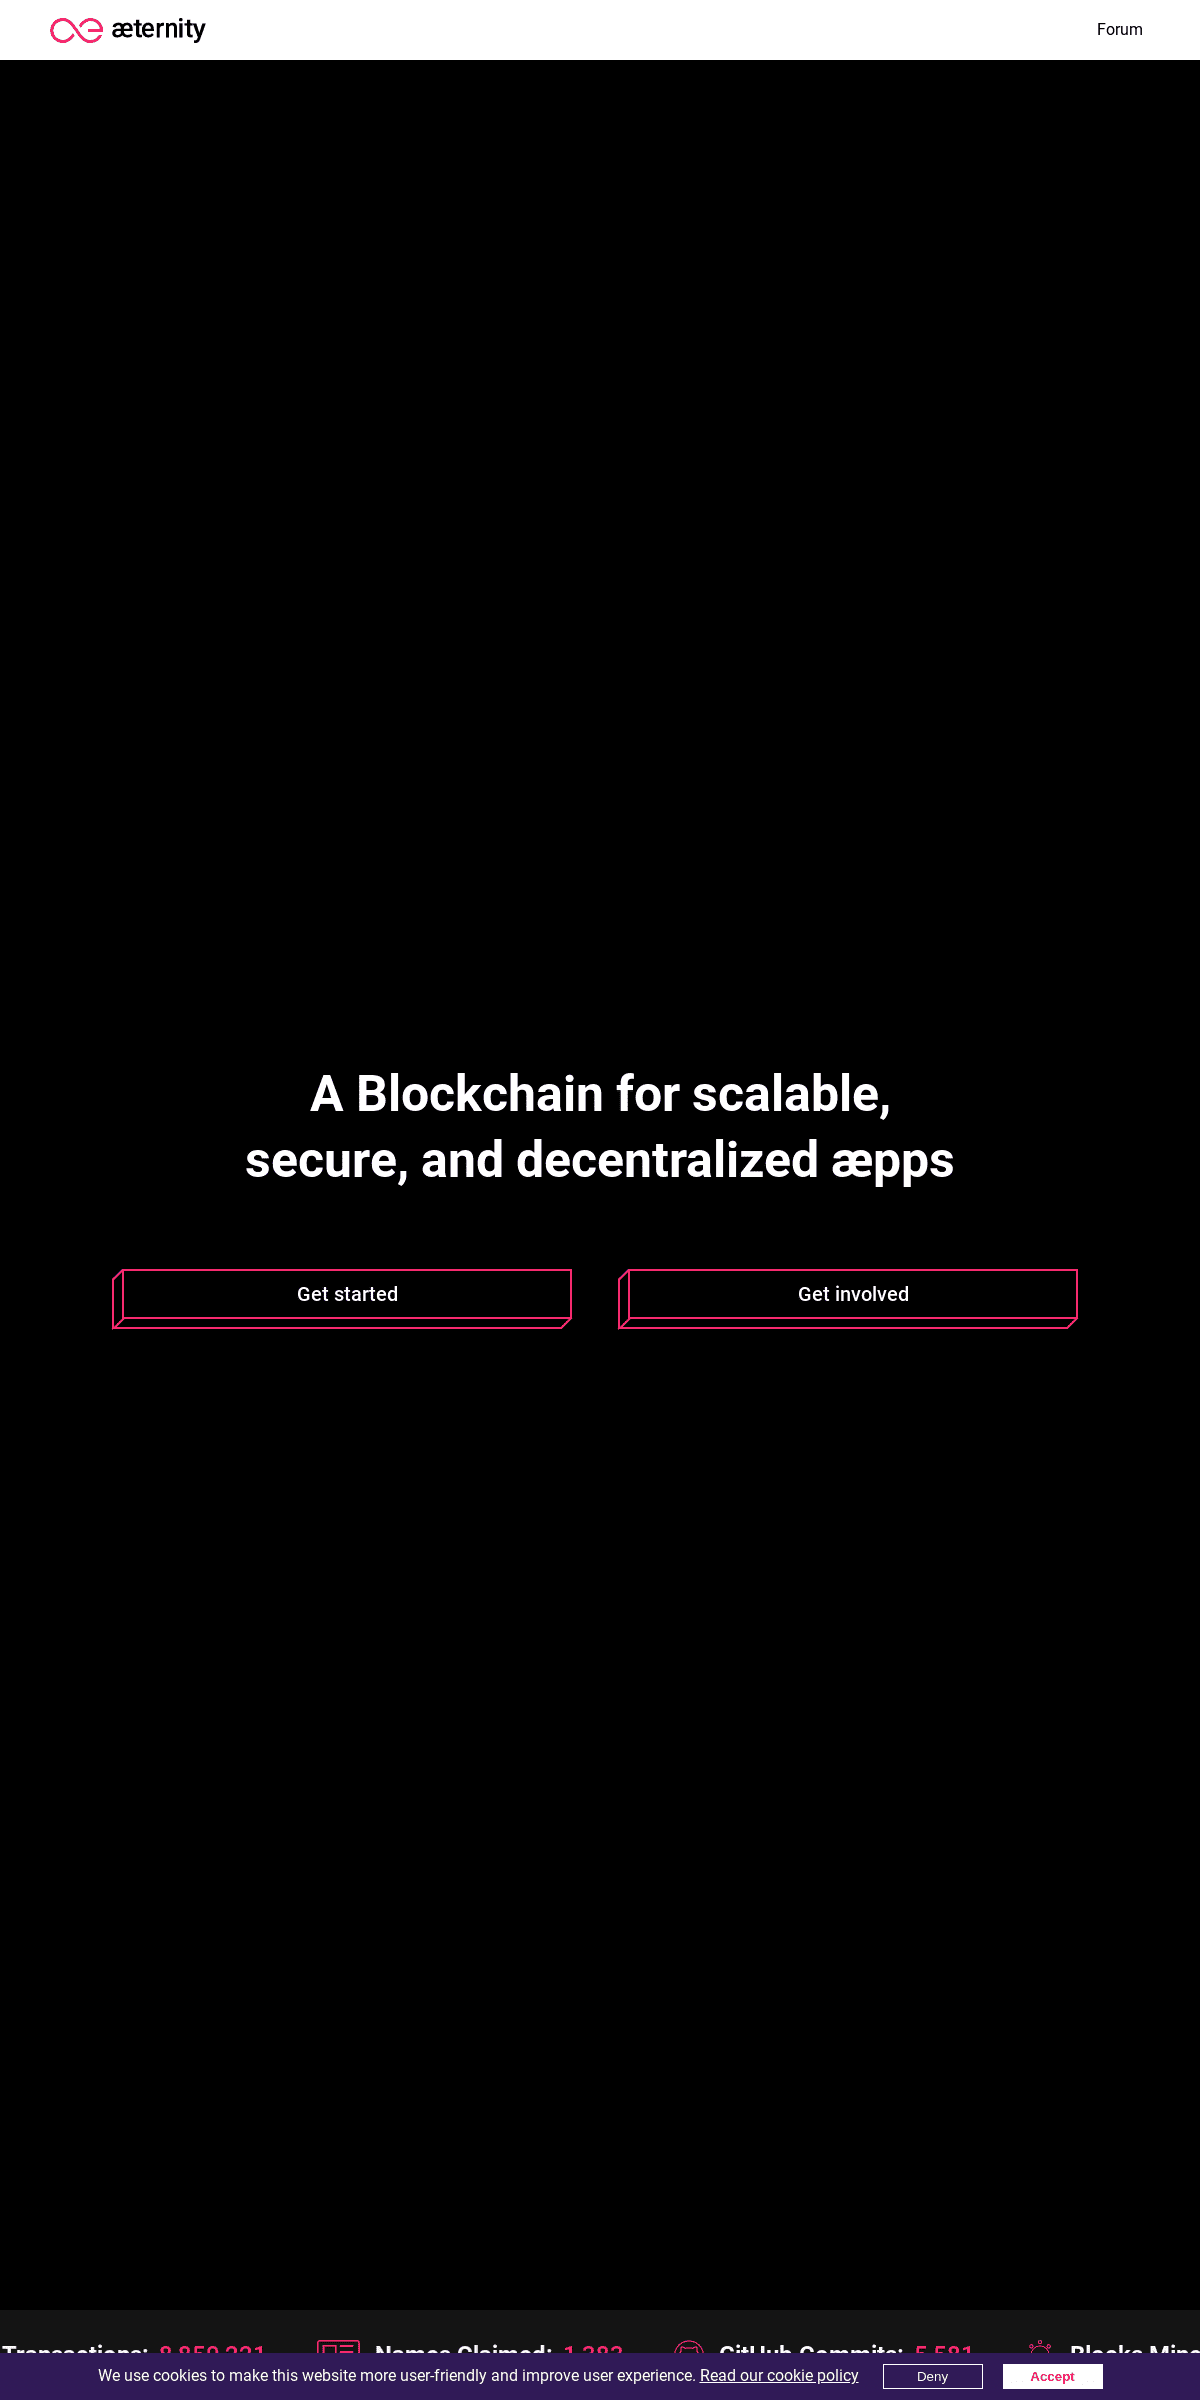 A complete backup of aeternity.com